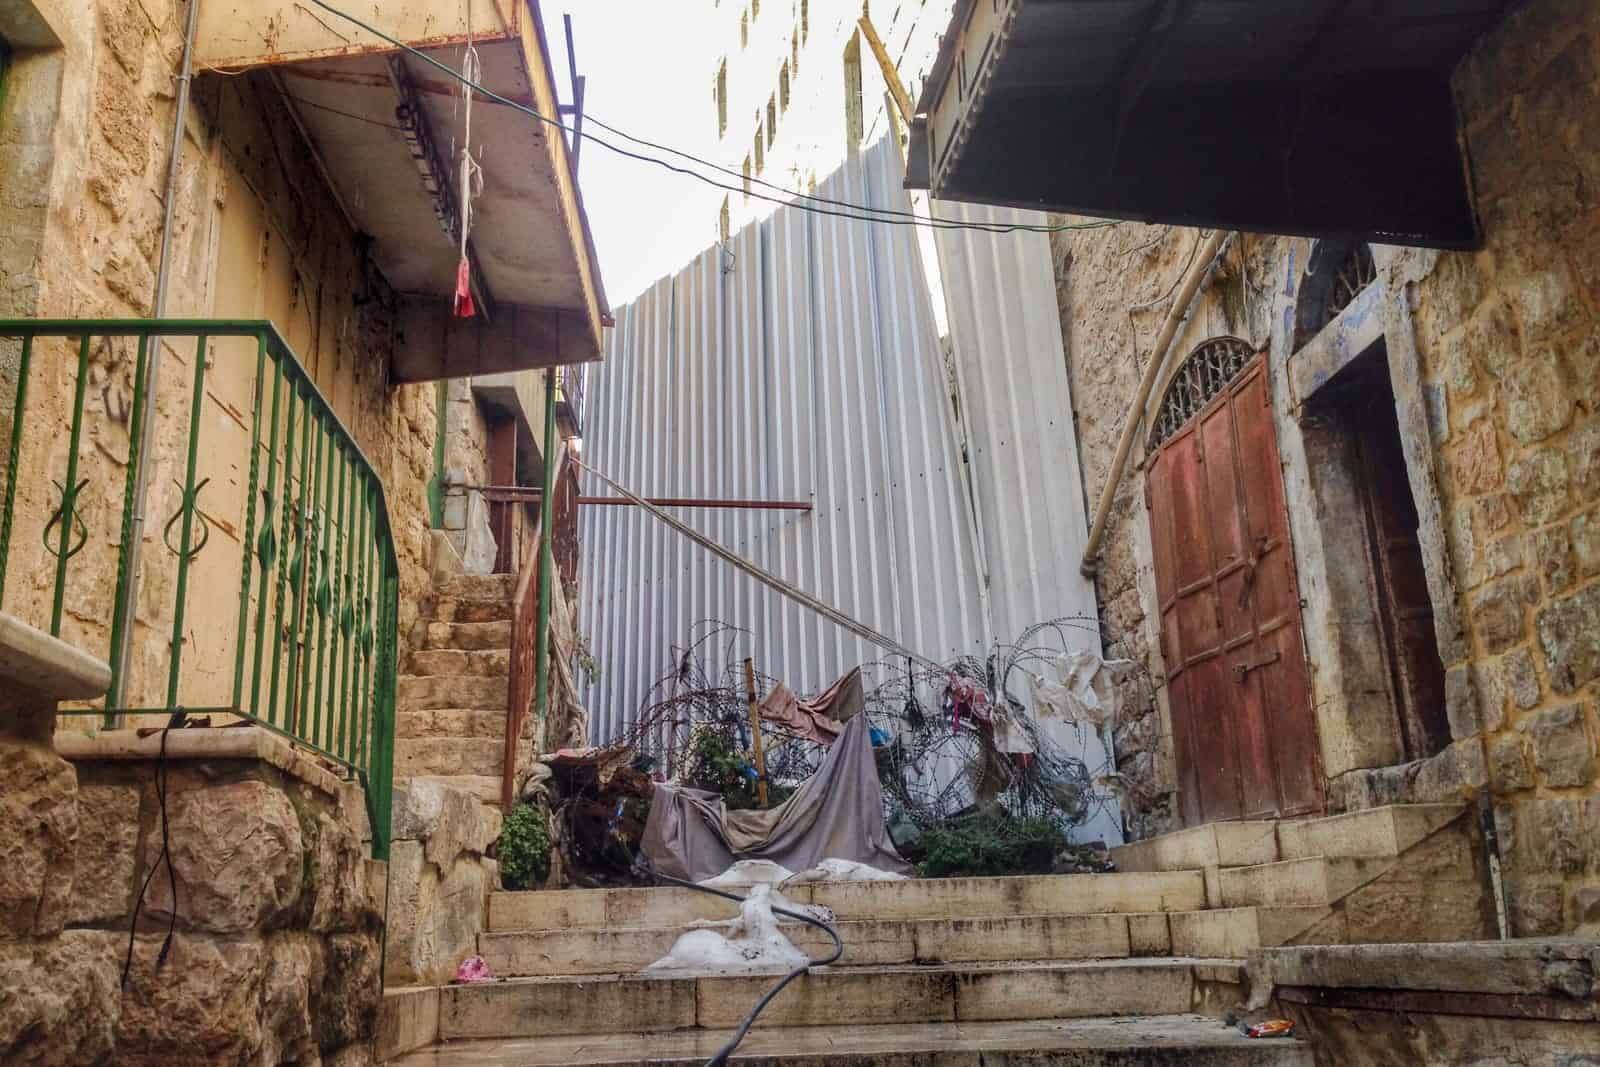 Man made barriers dividing the two sides of Hebron in the West Bank, Palestine